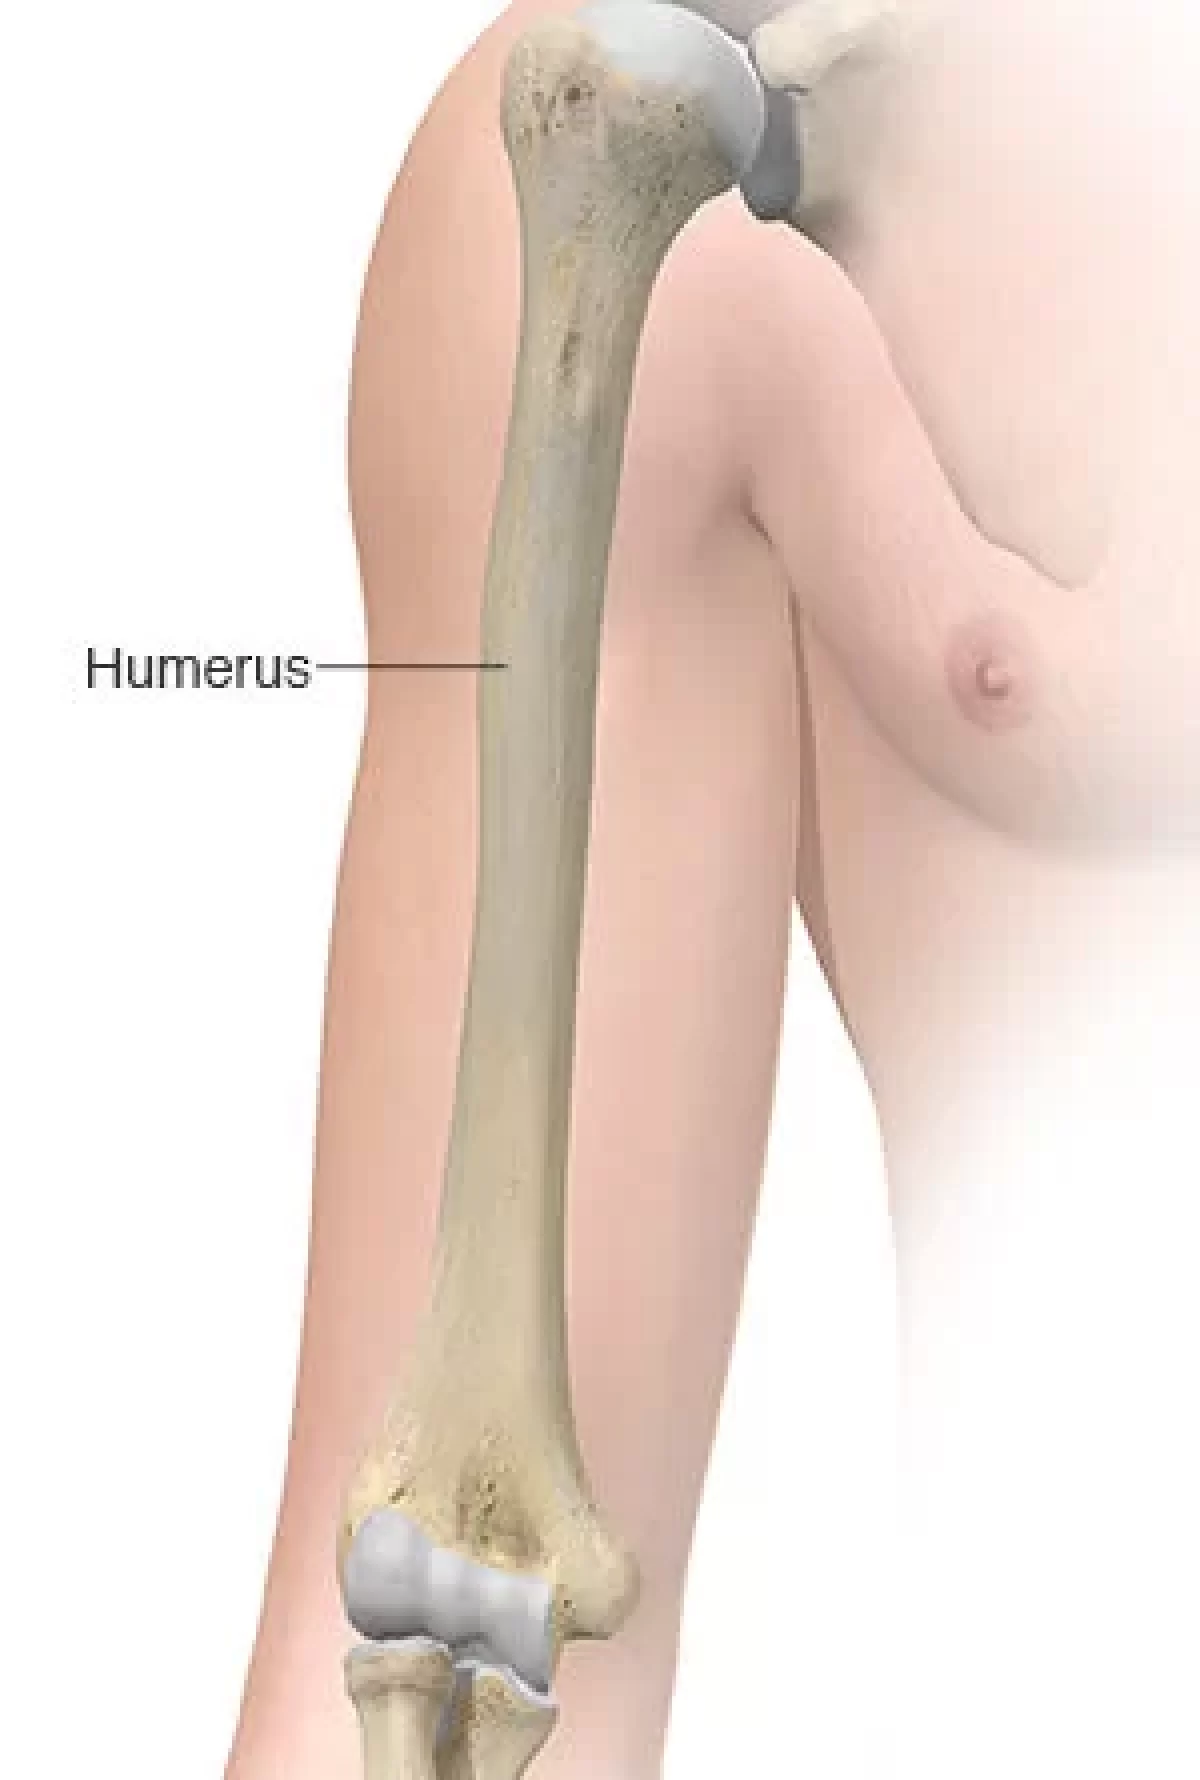 Humerus Photos and Images